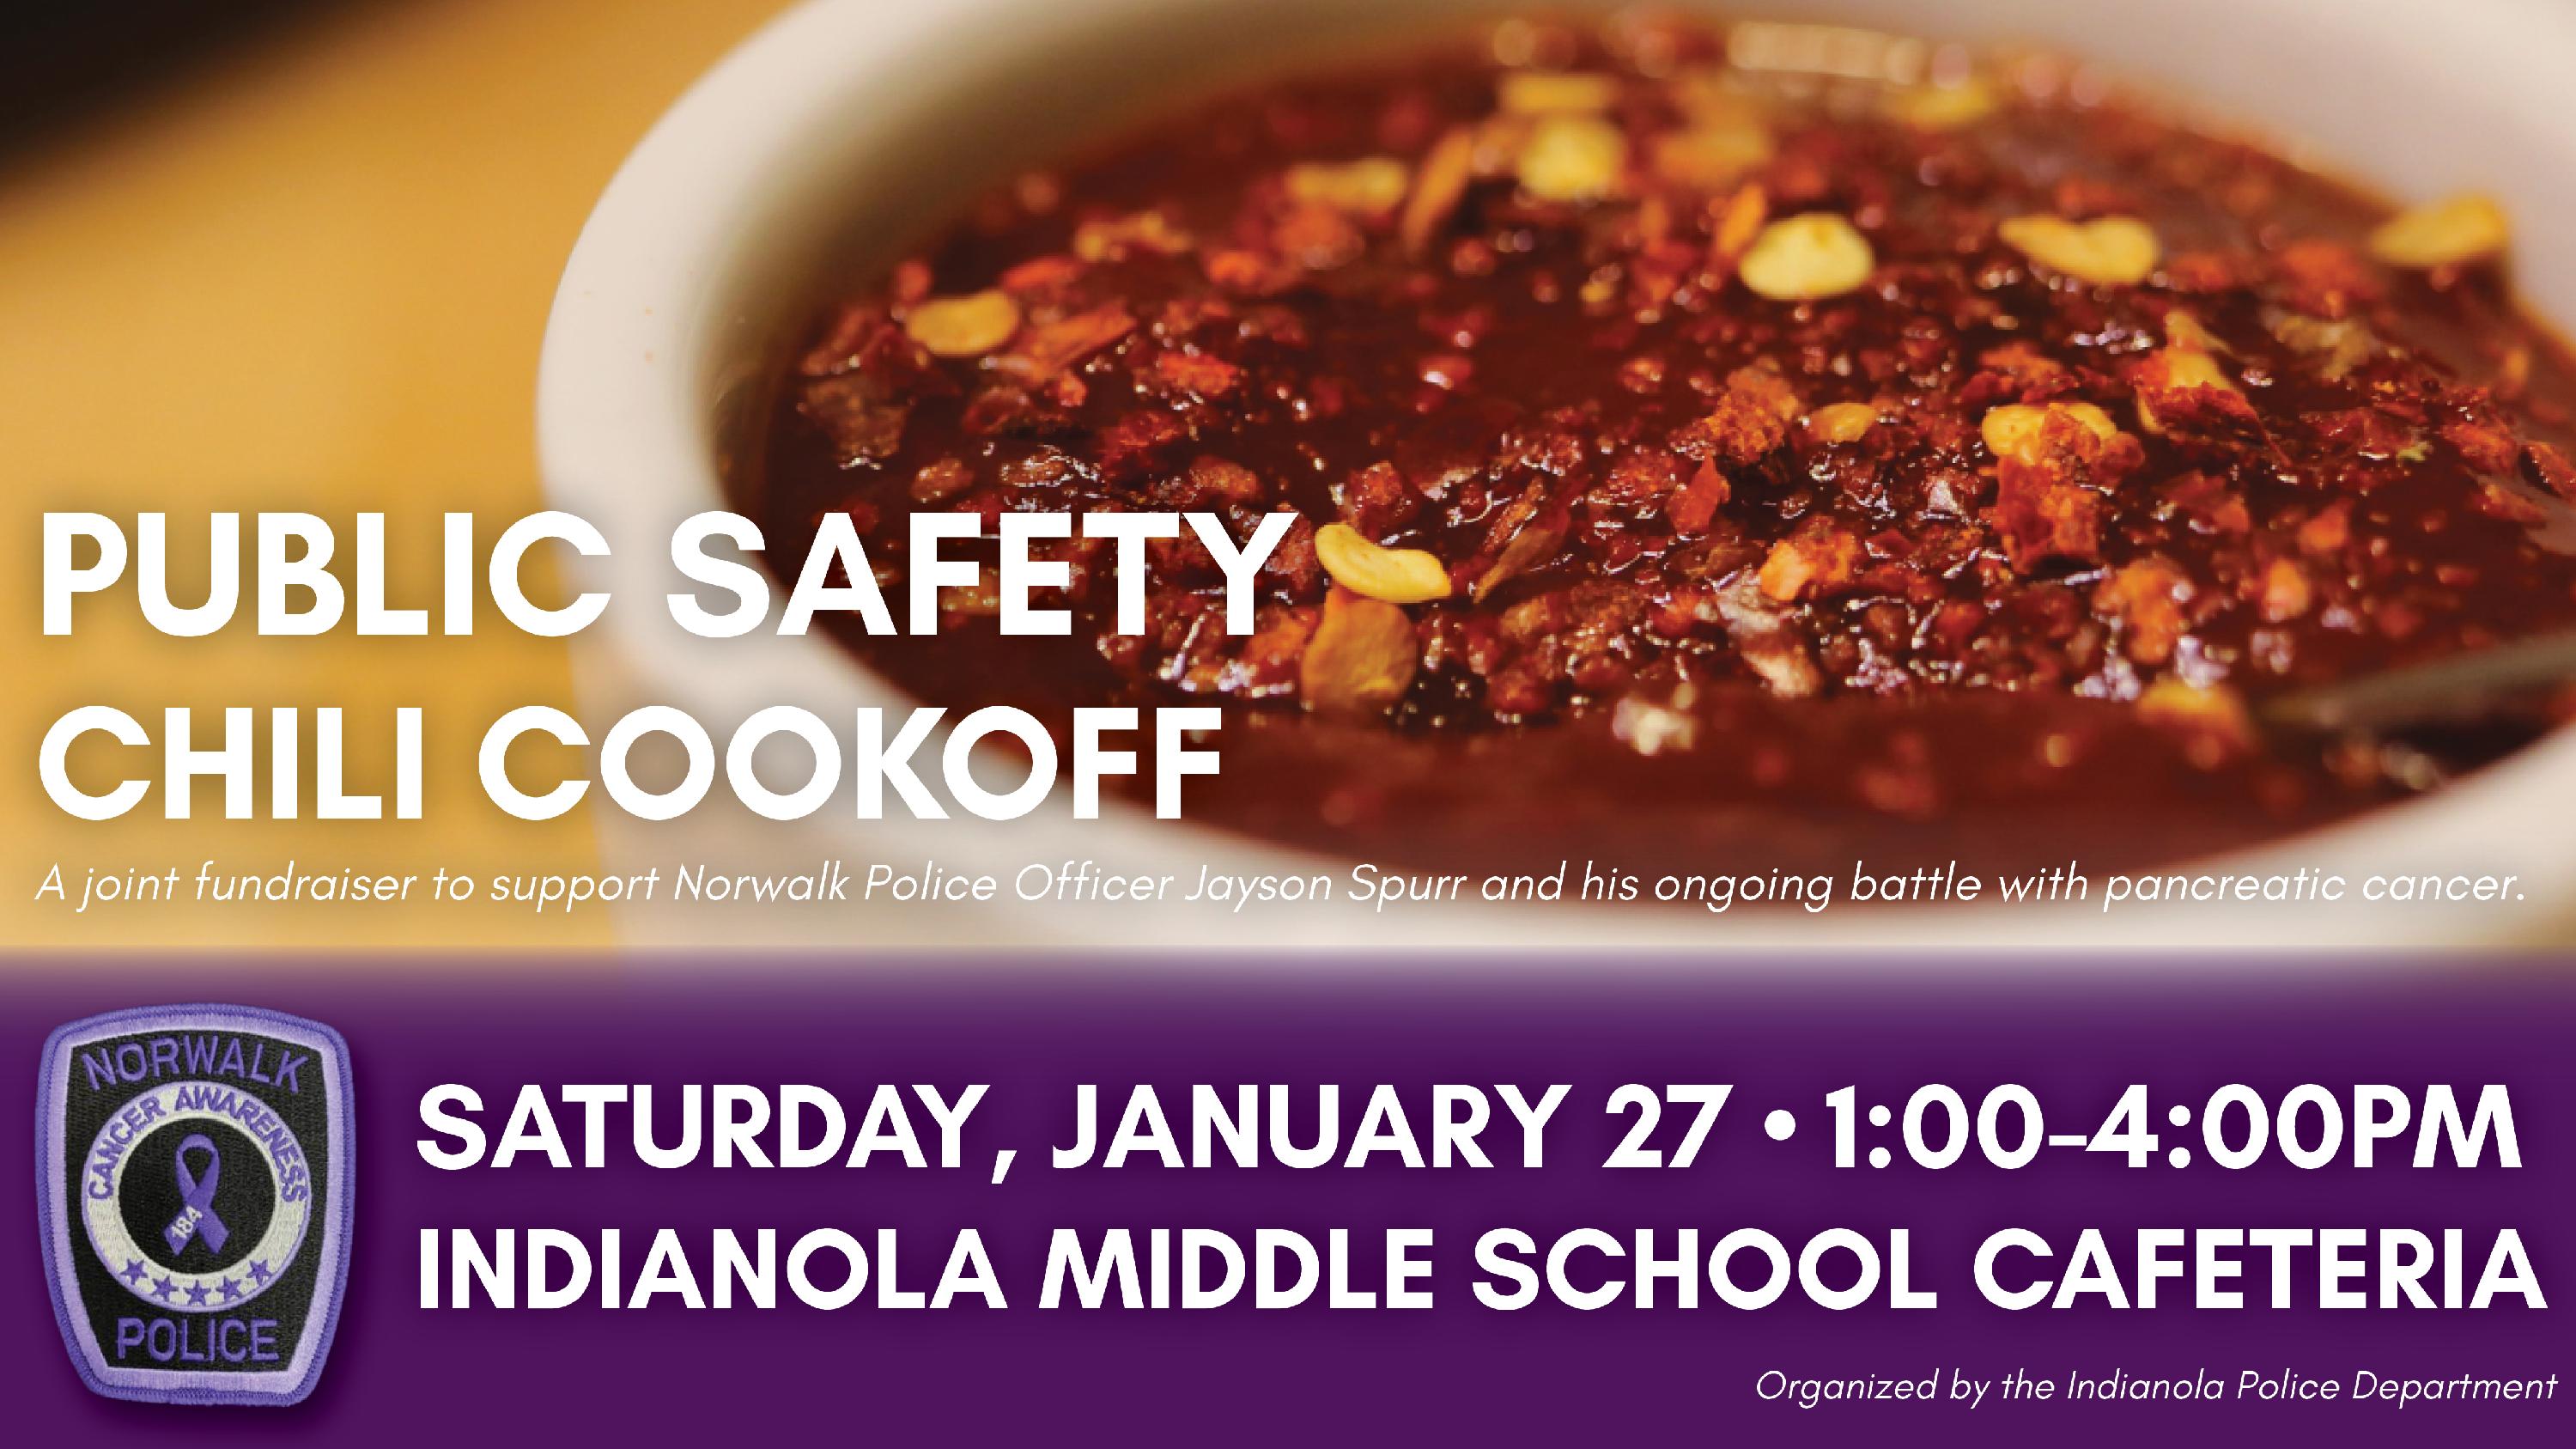 Public-Safety-Chili-Cookoff-Graphic_1920x1080